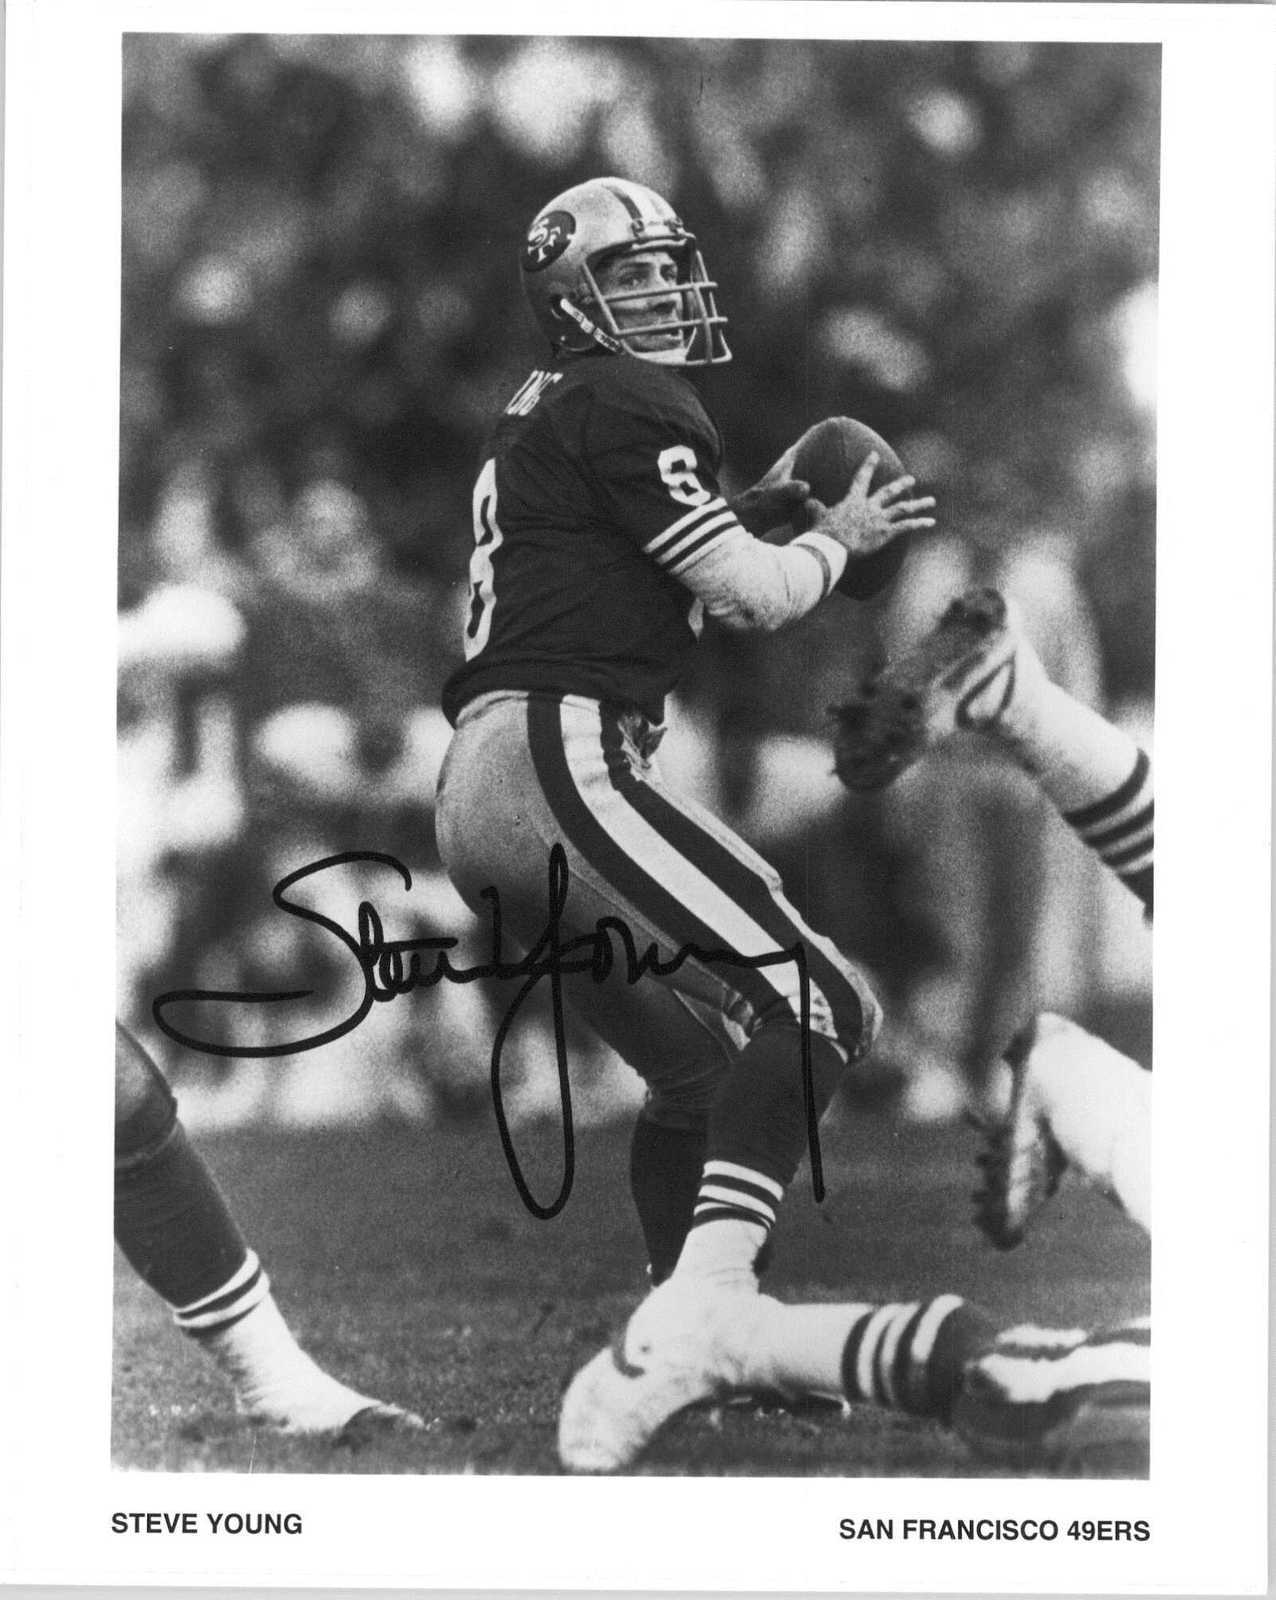 Primary image for Steve Young Signed Autographed Glossy 8x10 Photo - San Francisco 49ers